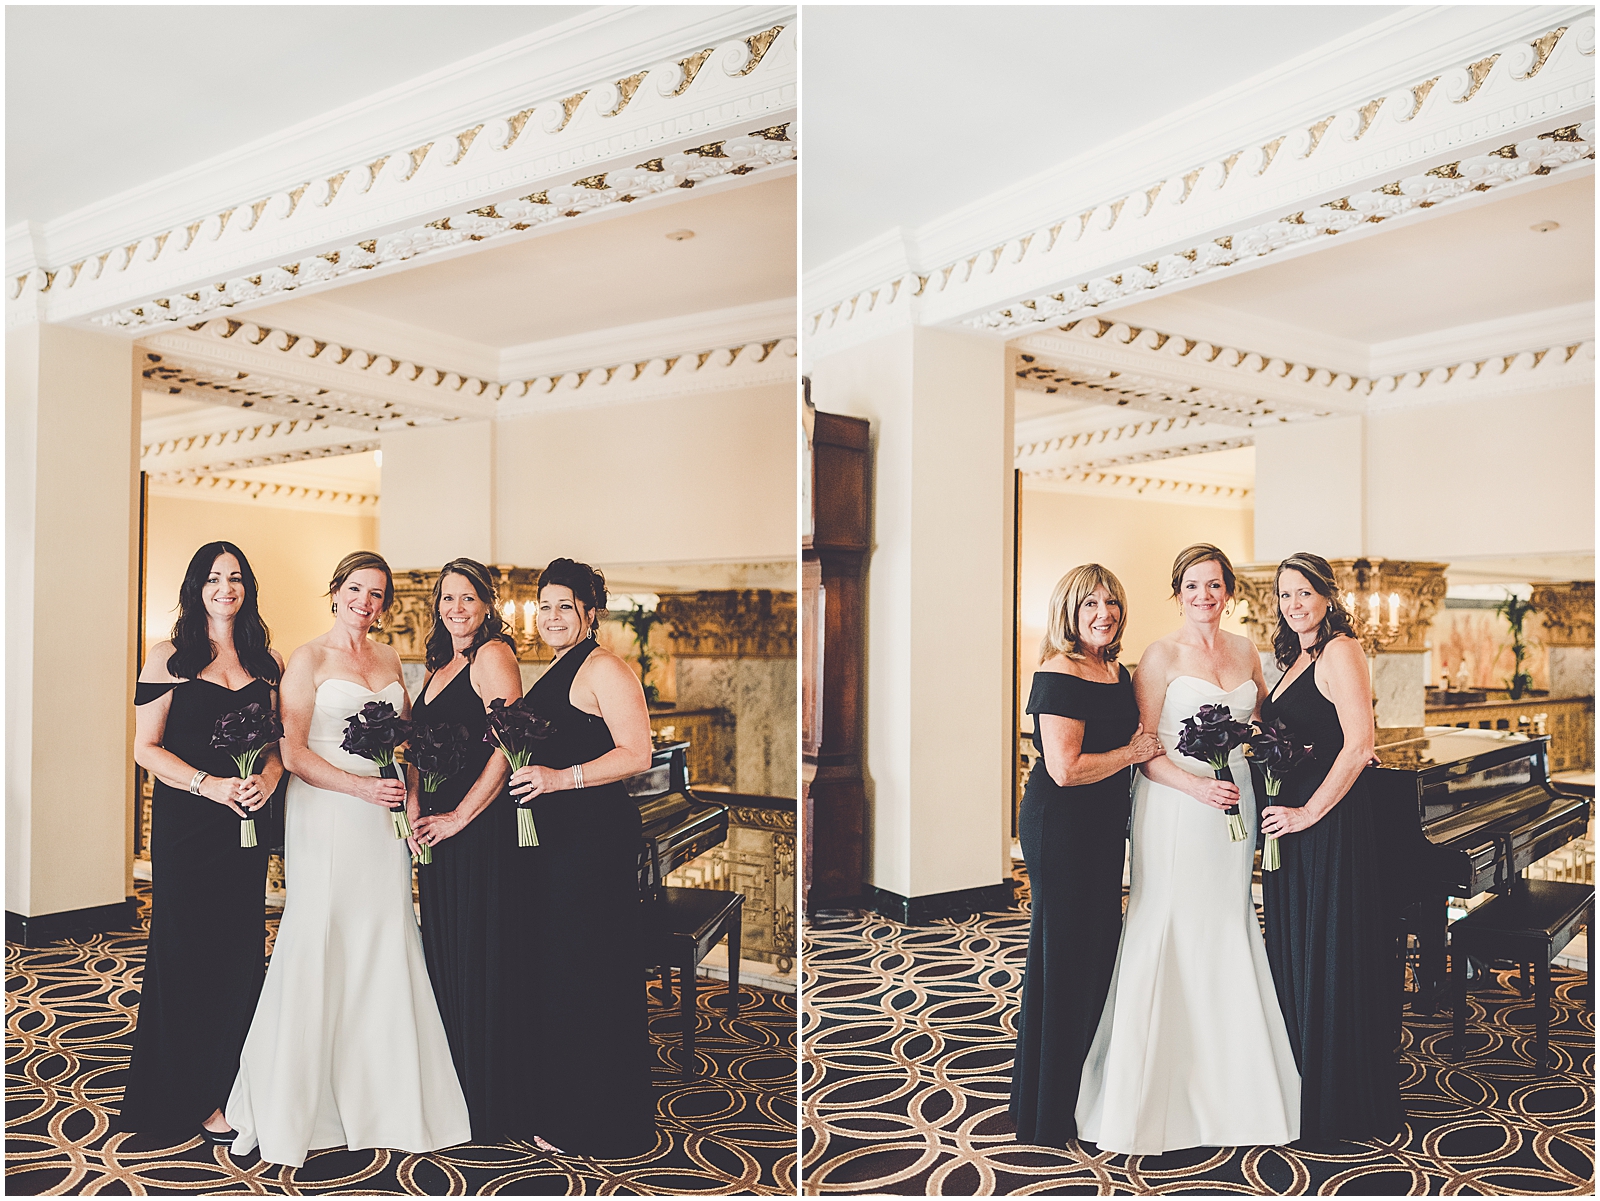 Annie and Virgil's wedding at The Seelbach Hilton in Louisville, Kentucky with Chicagoland wedding photographer Kara Evans Photographer.